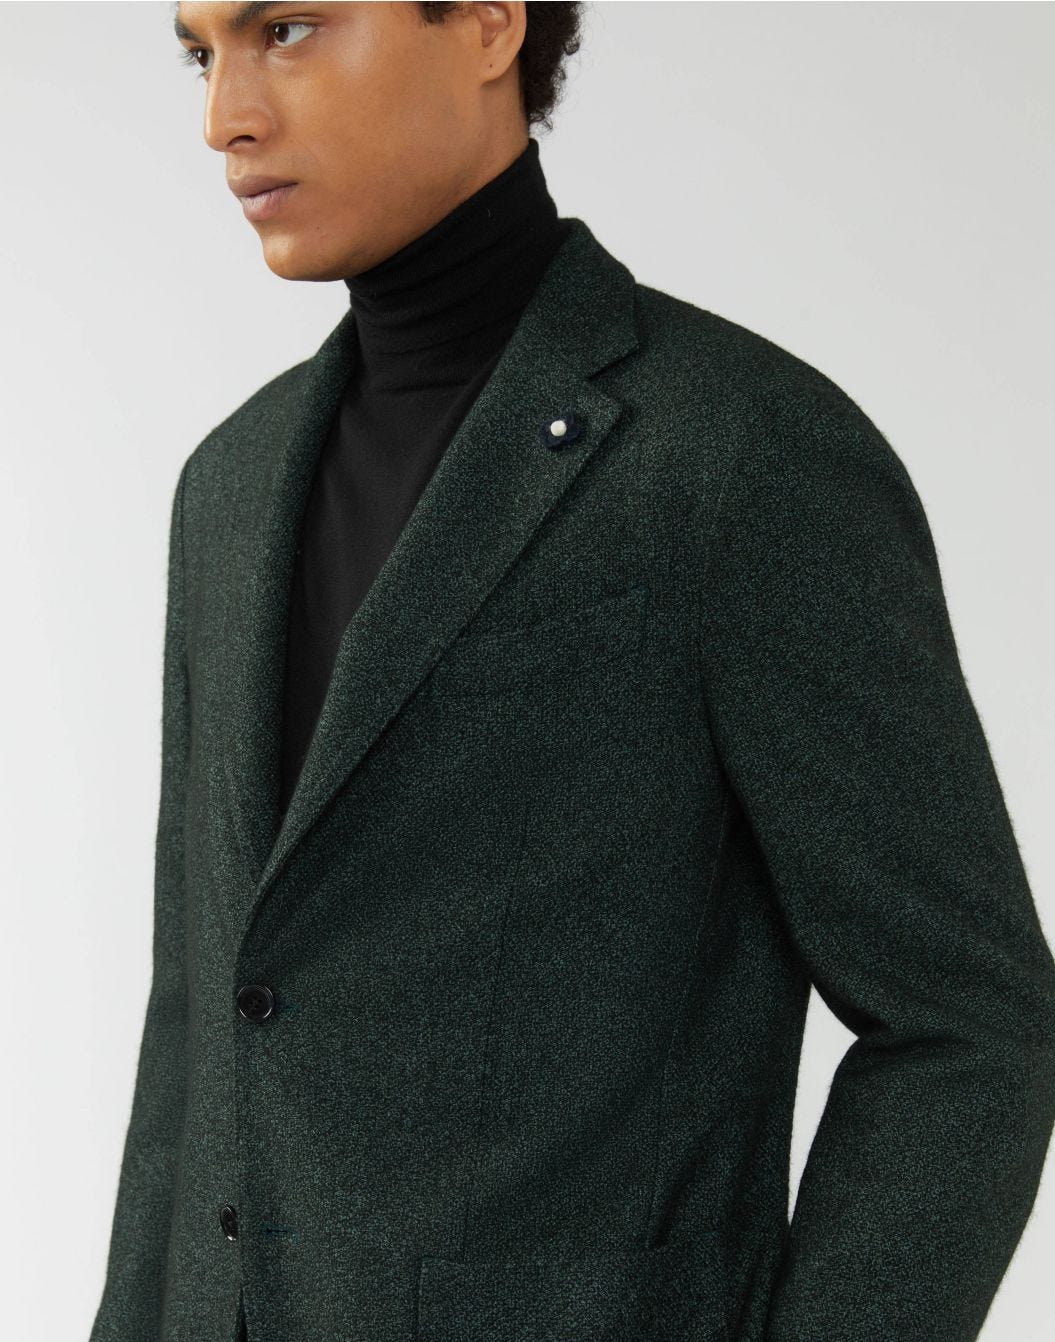 Black-and-green jacket in cashmere and silk - Supersoft